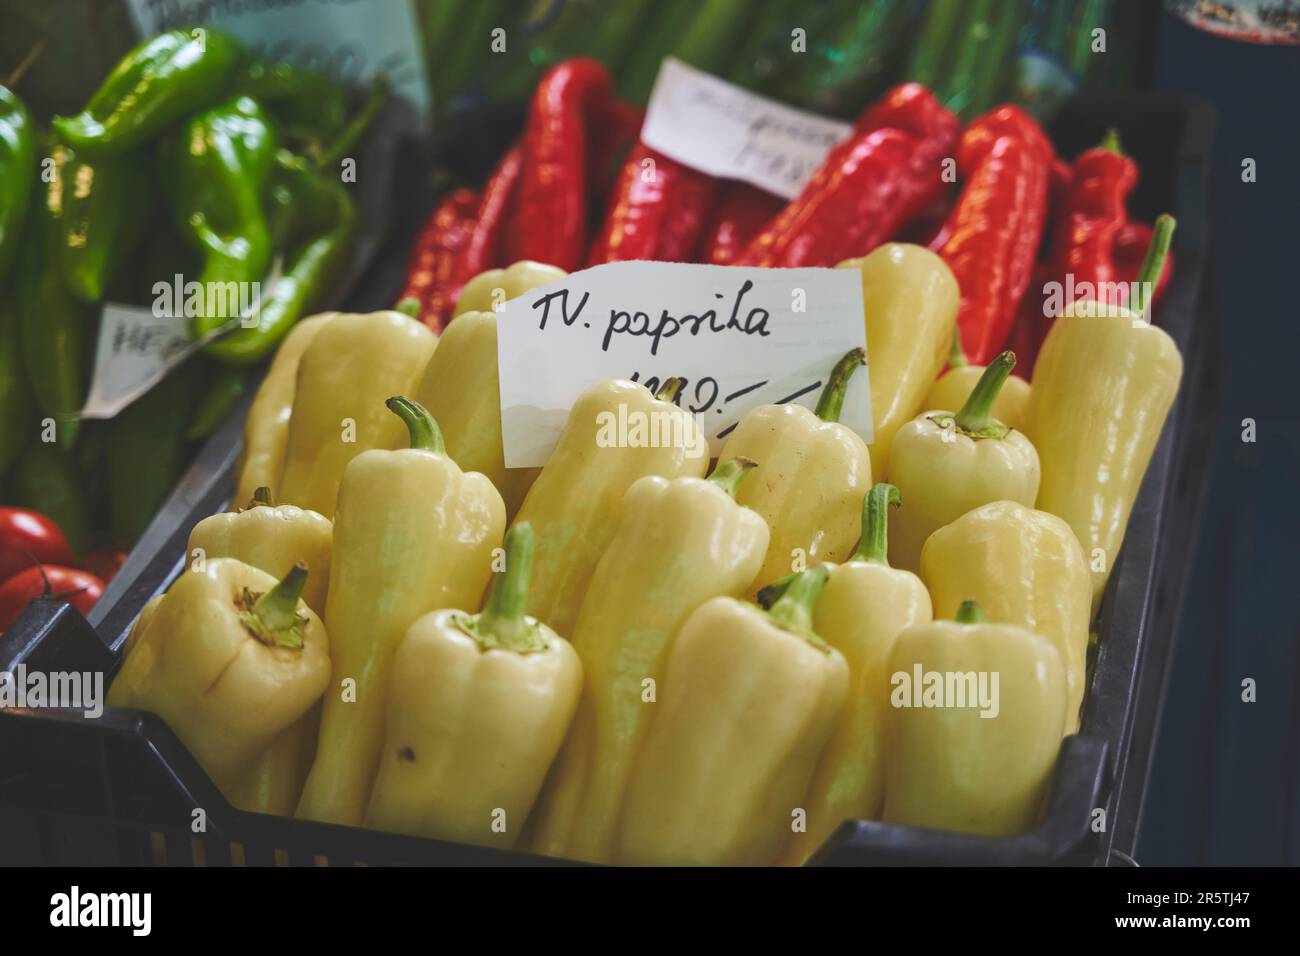 A variety of freshly picked peppers are available for purchase at a bustling market stall Stock Photo